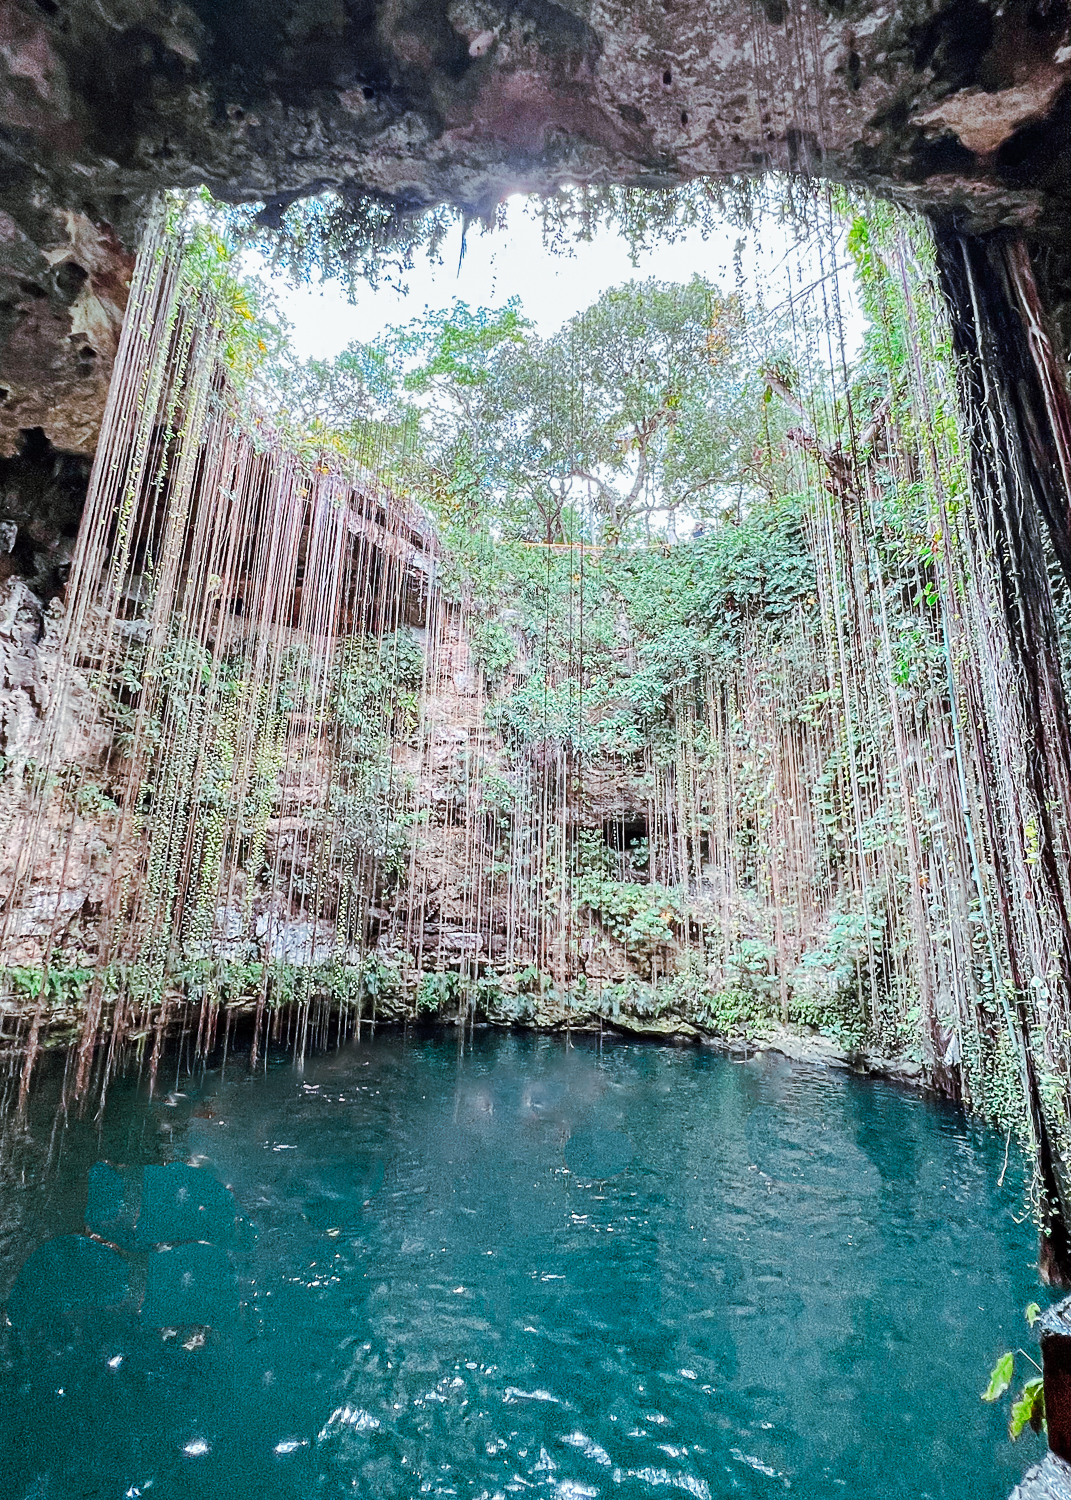 Pacific Globetrotters, budget family travel blog, shares the Best Cenotes In Cancun. Ik'kil